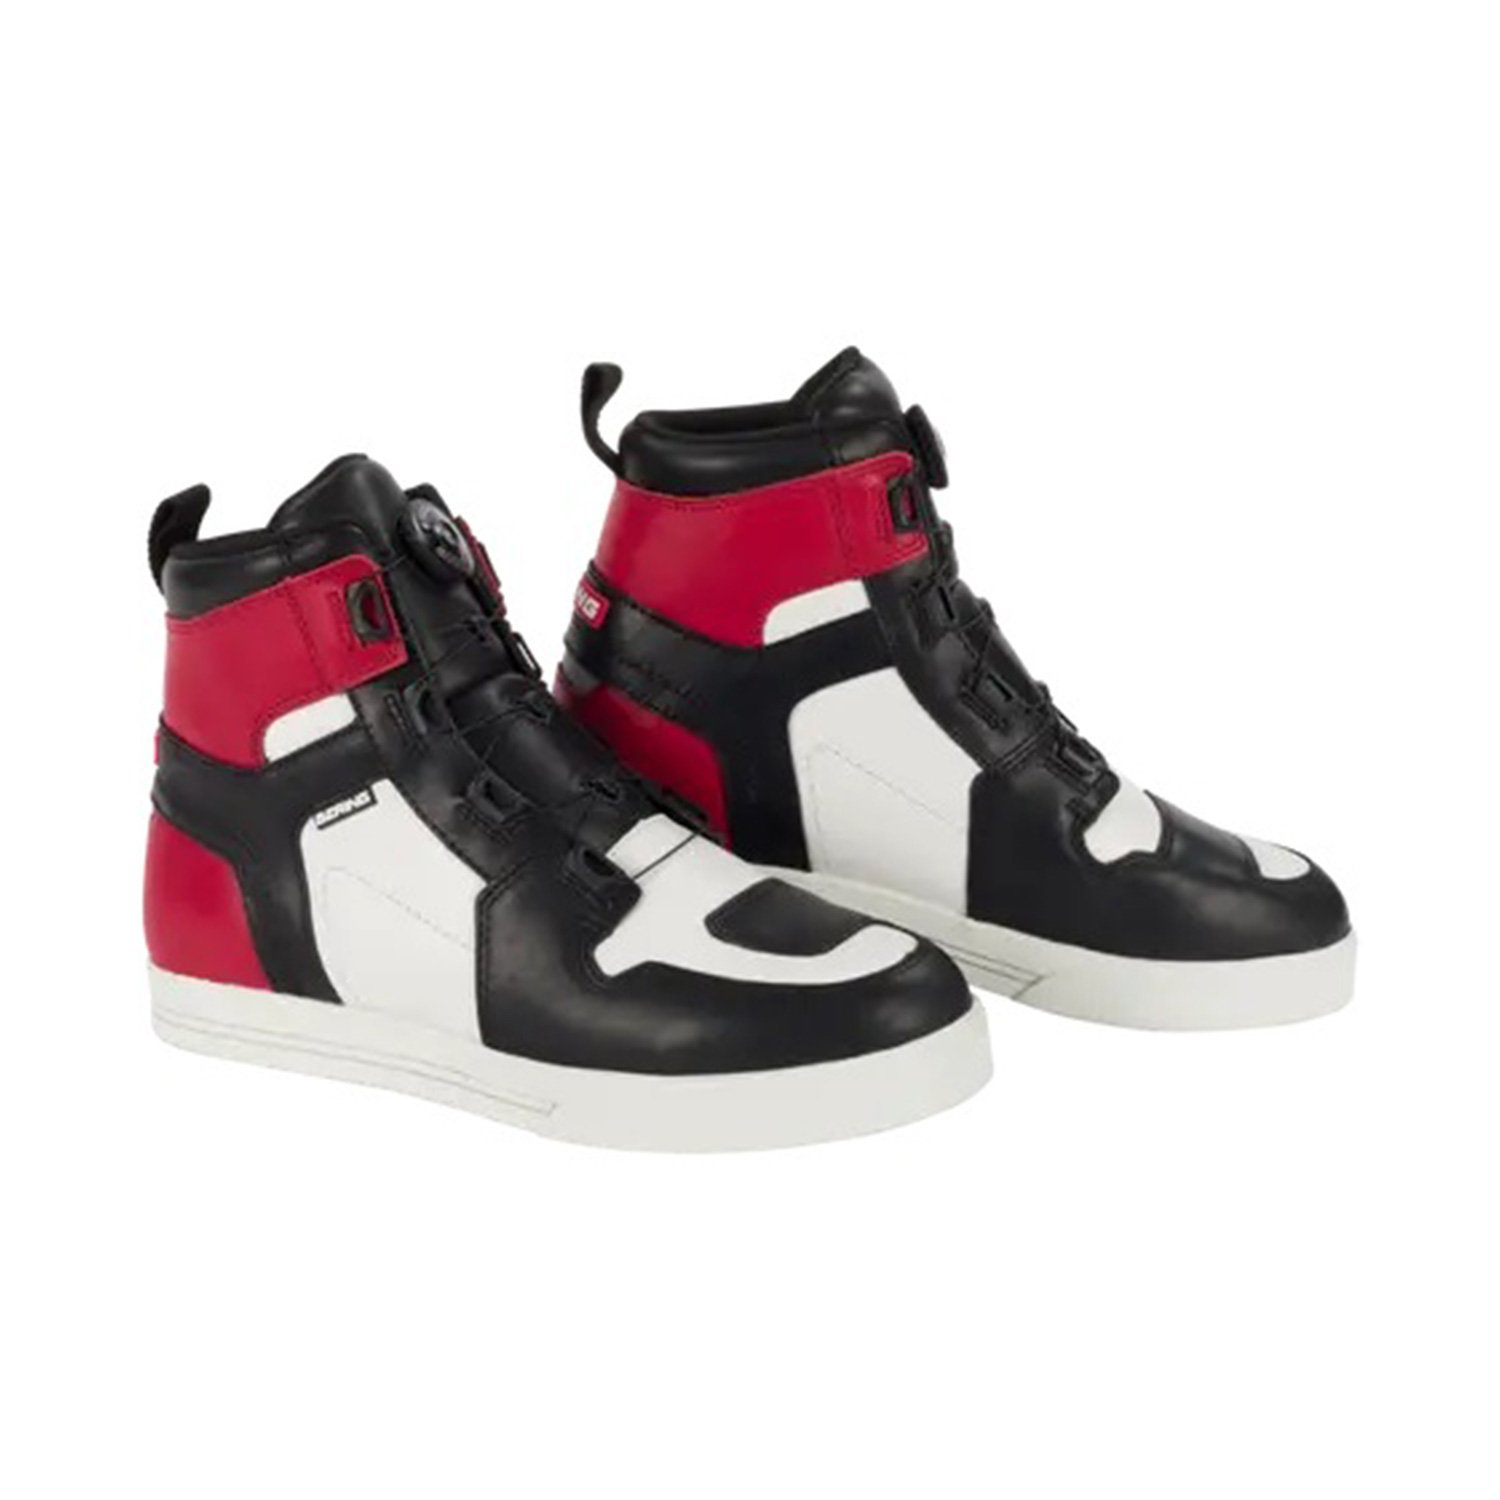 Image of Bering Sneakers Reflex A-Top Black White Red Size 44 EN